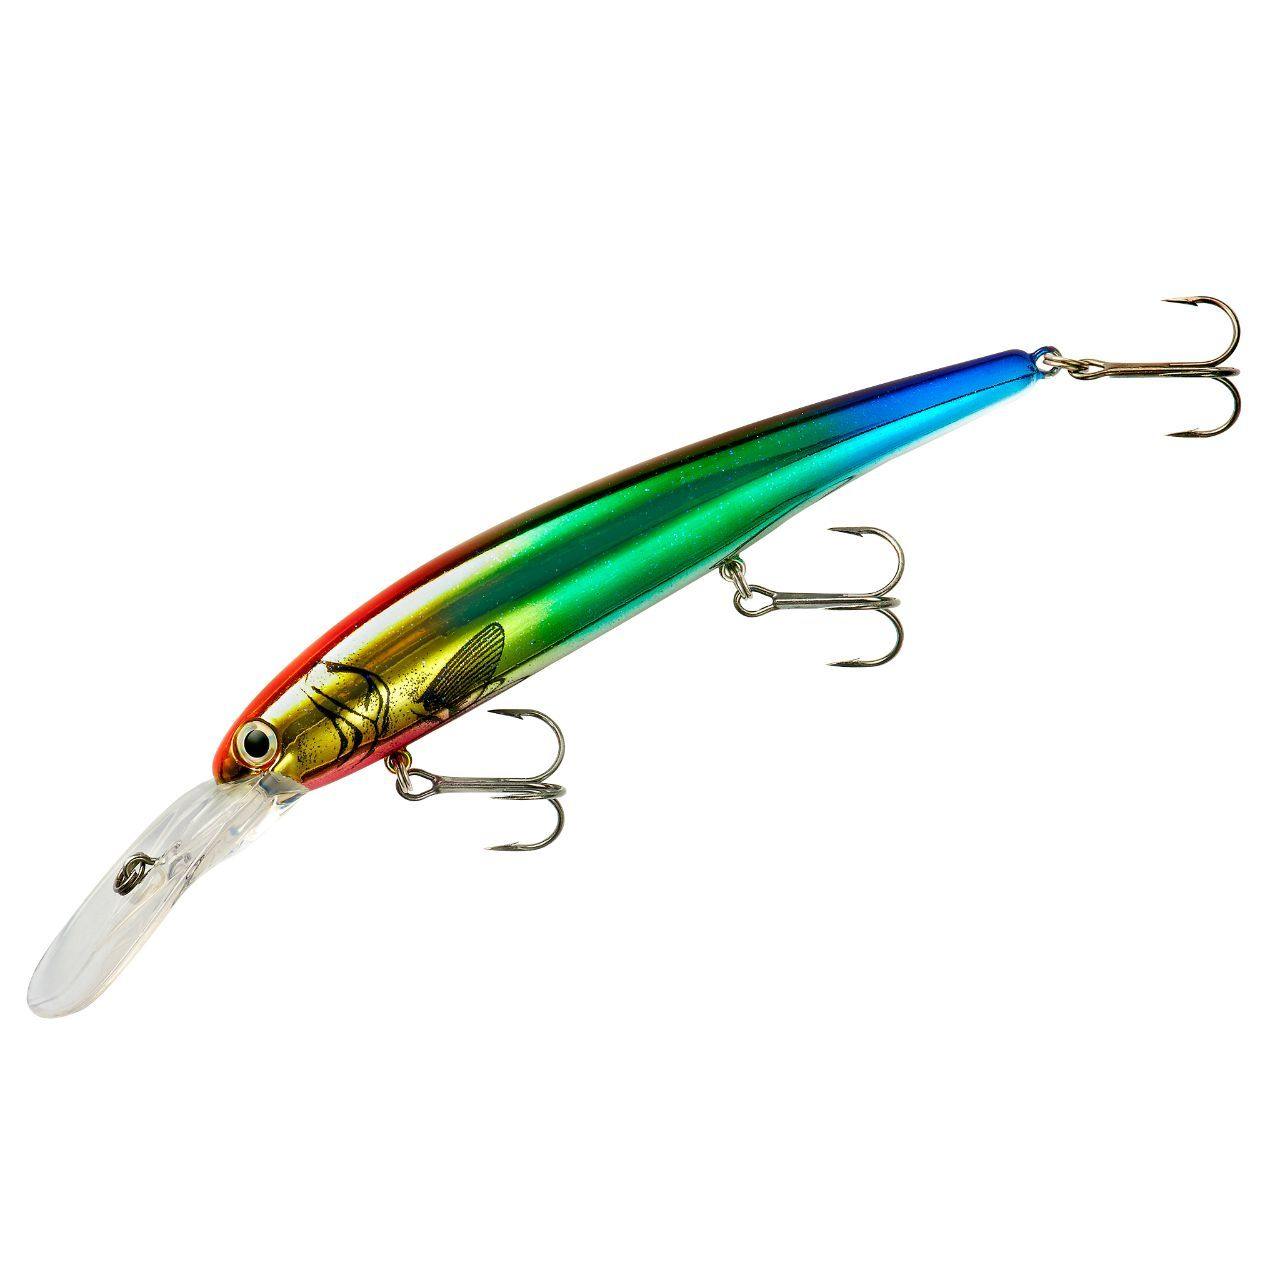 Bandit Lures - The Bandit B-Shad provides a great walleye trolling option  when conditions or forage demand something a bit smaller than a Bandit  Walleye Shallow or Walleye Deep. #LandItWithBandit